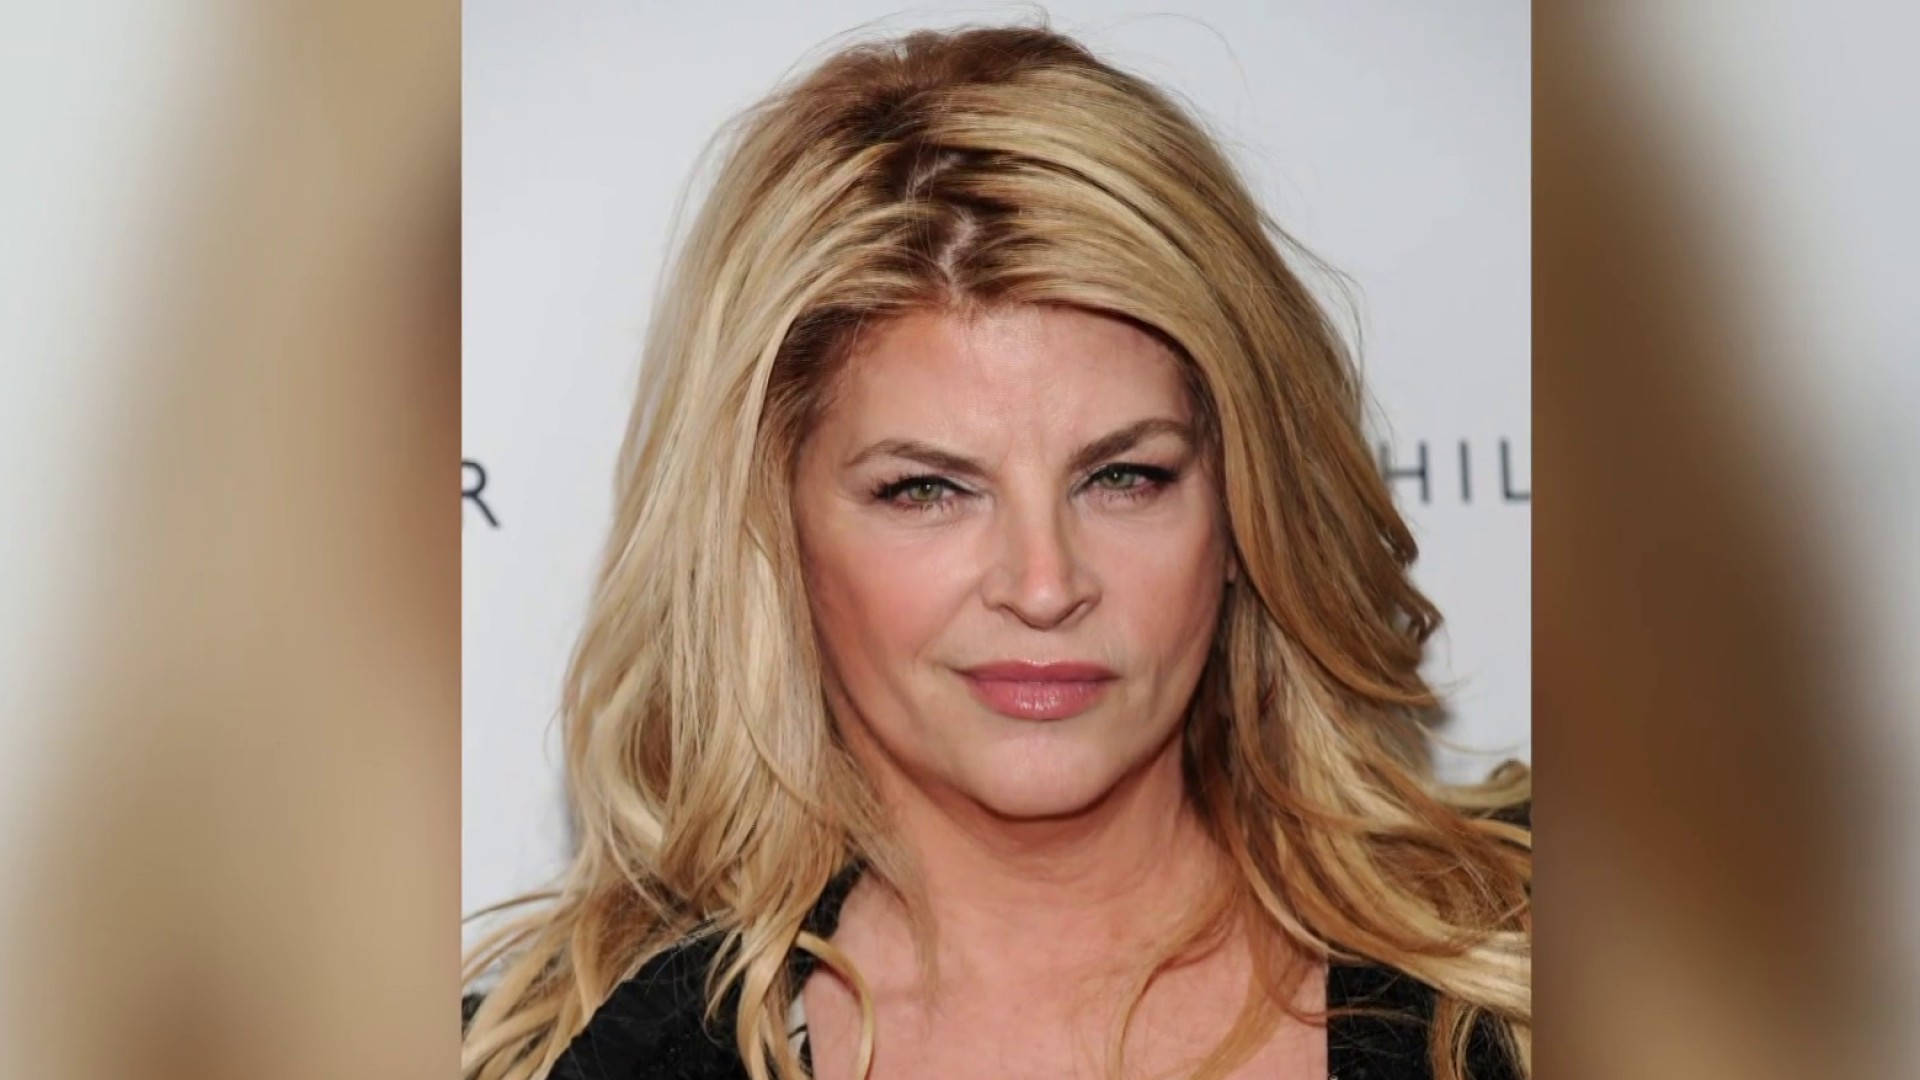 American Actress Kirstie Alley On Red Carpet Shot Wallpaper